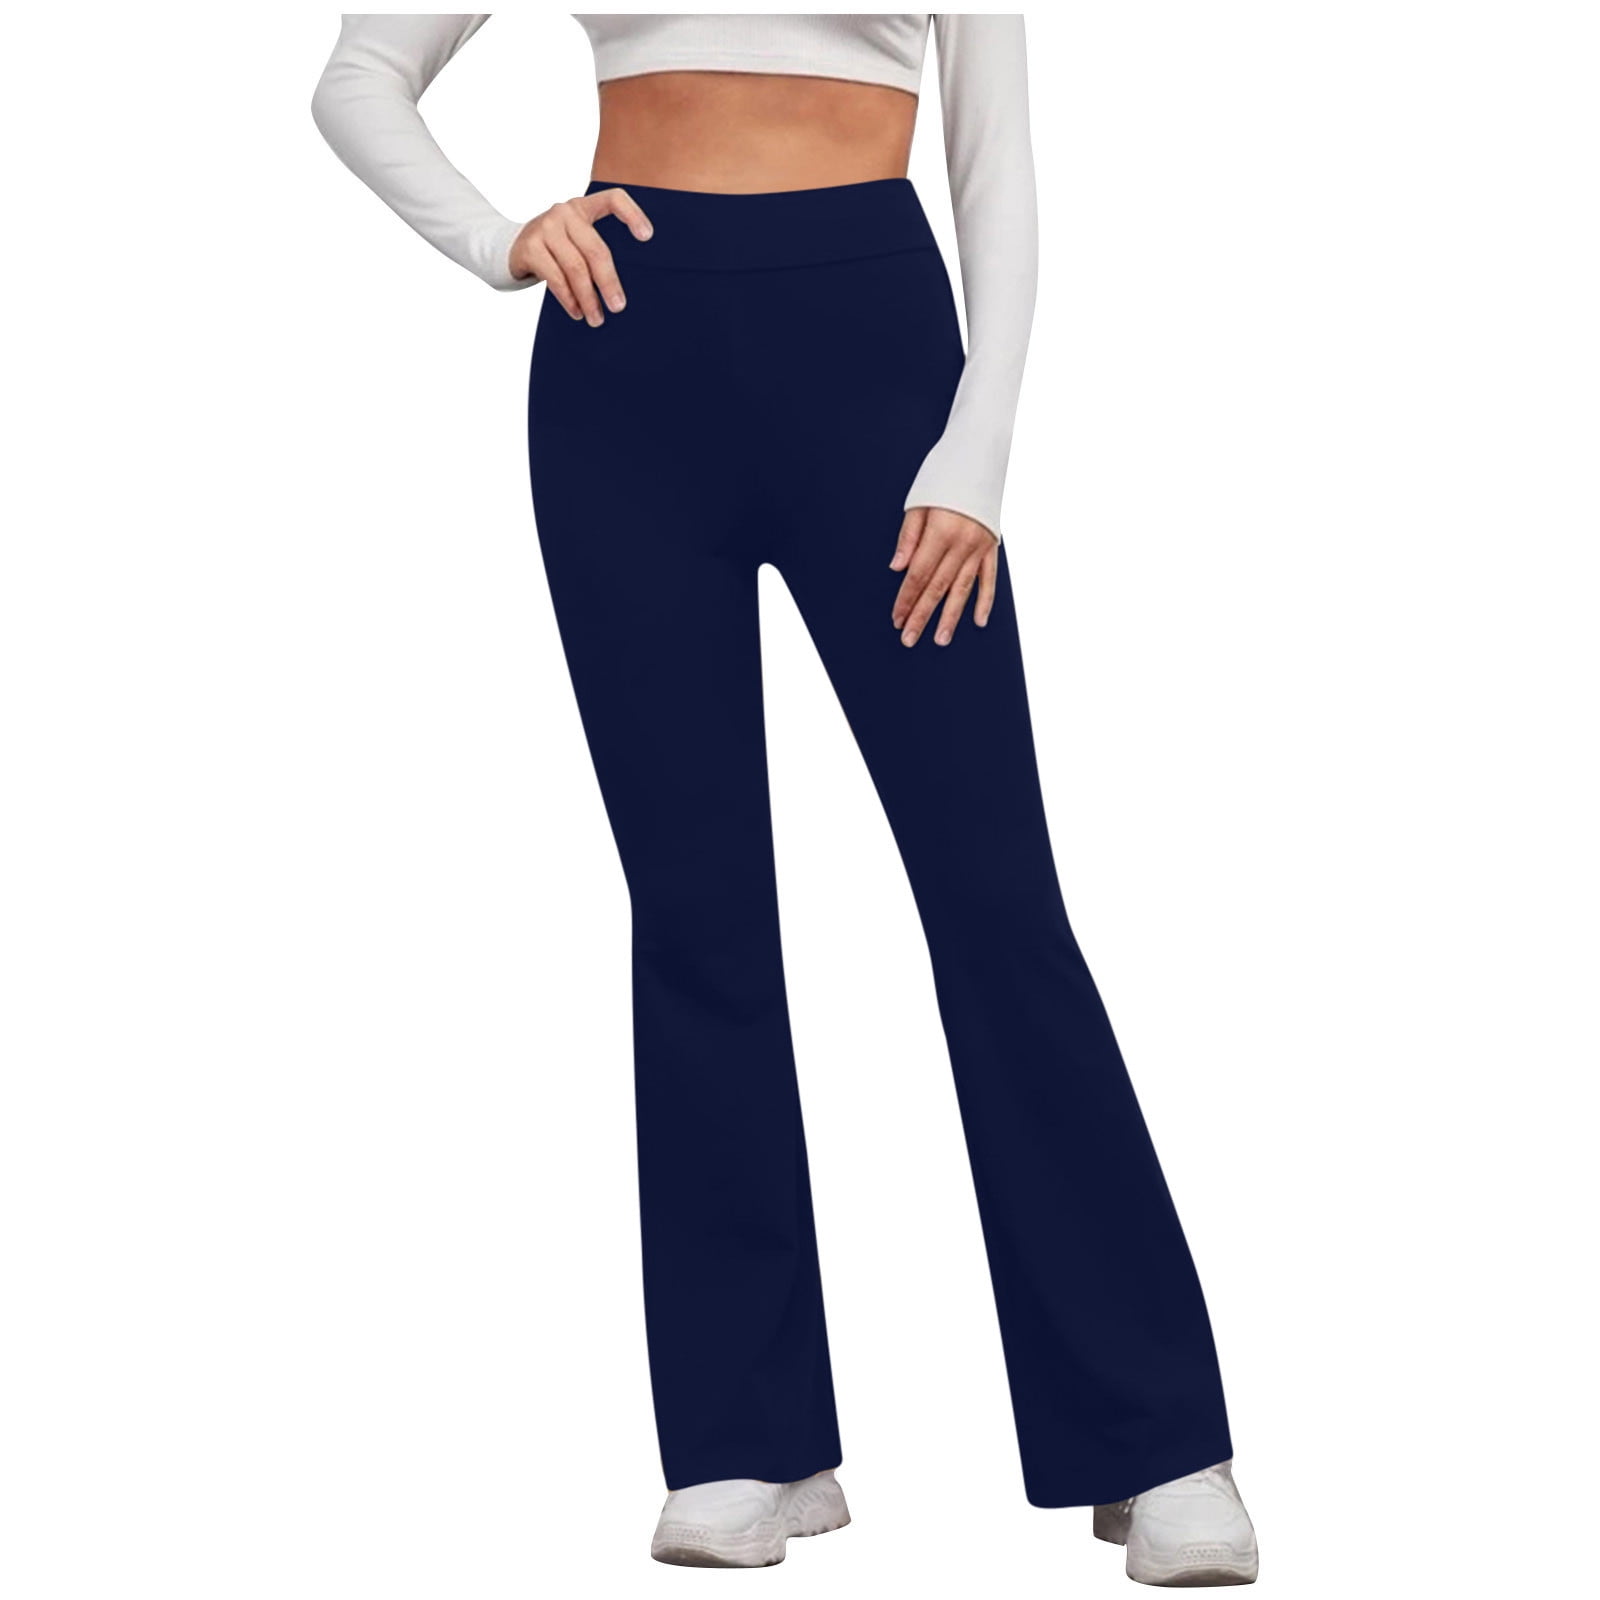 HEGALY Women's Flare Yoga Pants - Crossover Flare Leggings High Waisted  Bootcut Bell Bottom Workout Sweatpants Navy Blue, Navy Blue, XL : Buy  Online at Best Price in KSA - Souq is